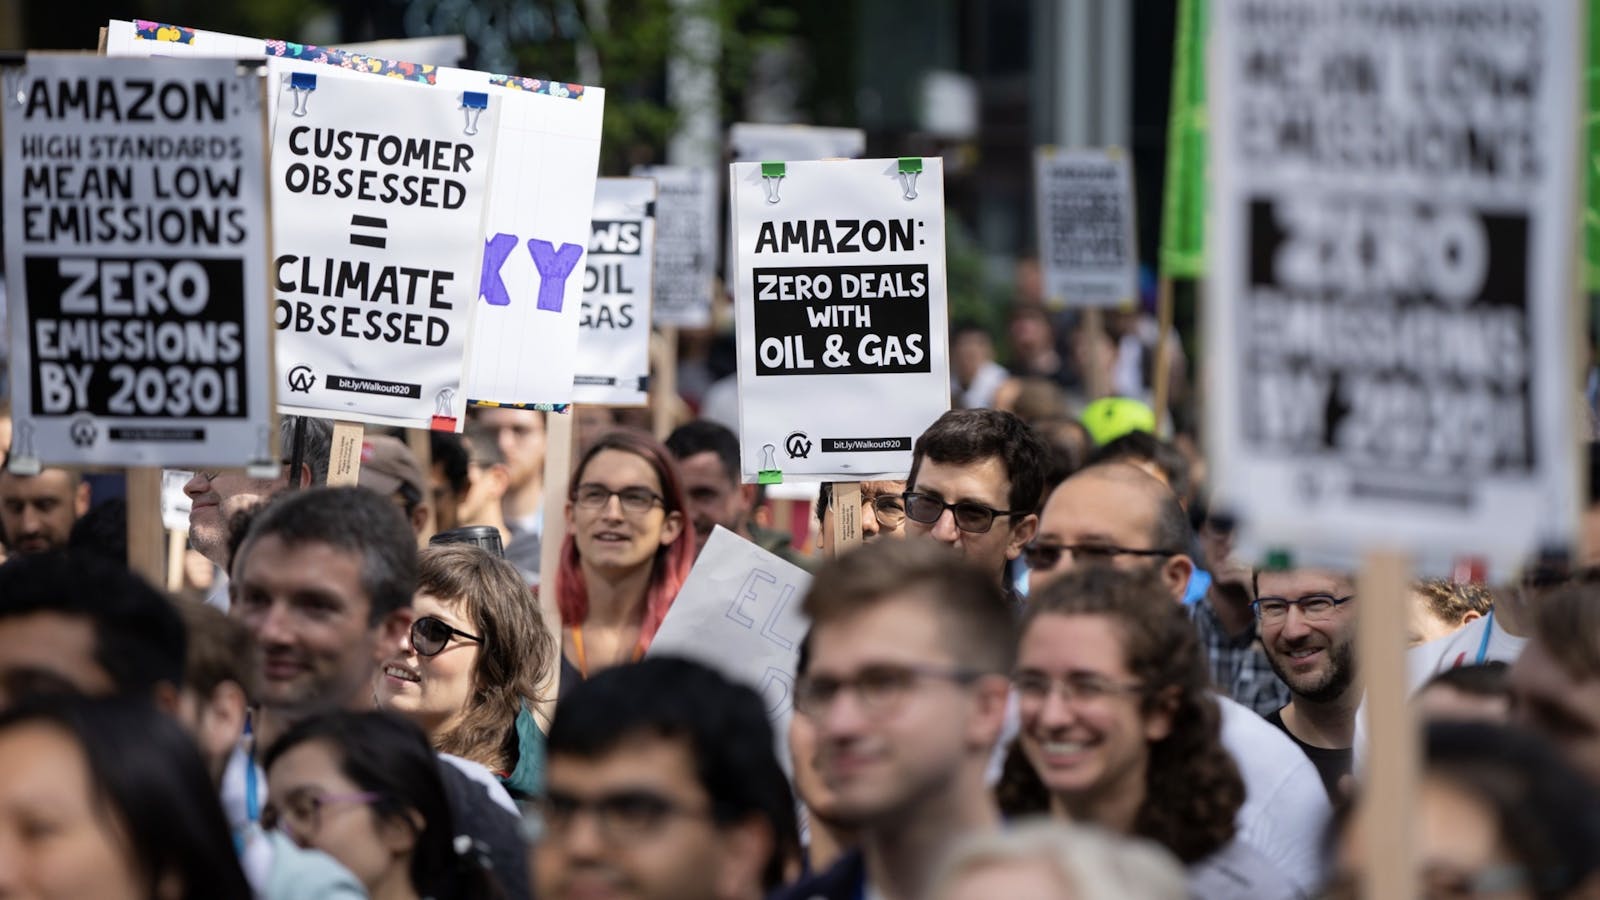 Amazon workers protesting the company over climate change last September. Photo by Bloomberg